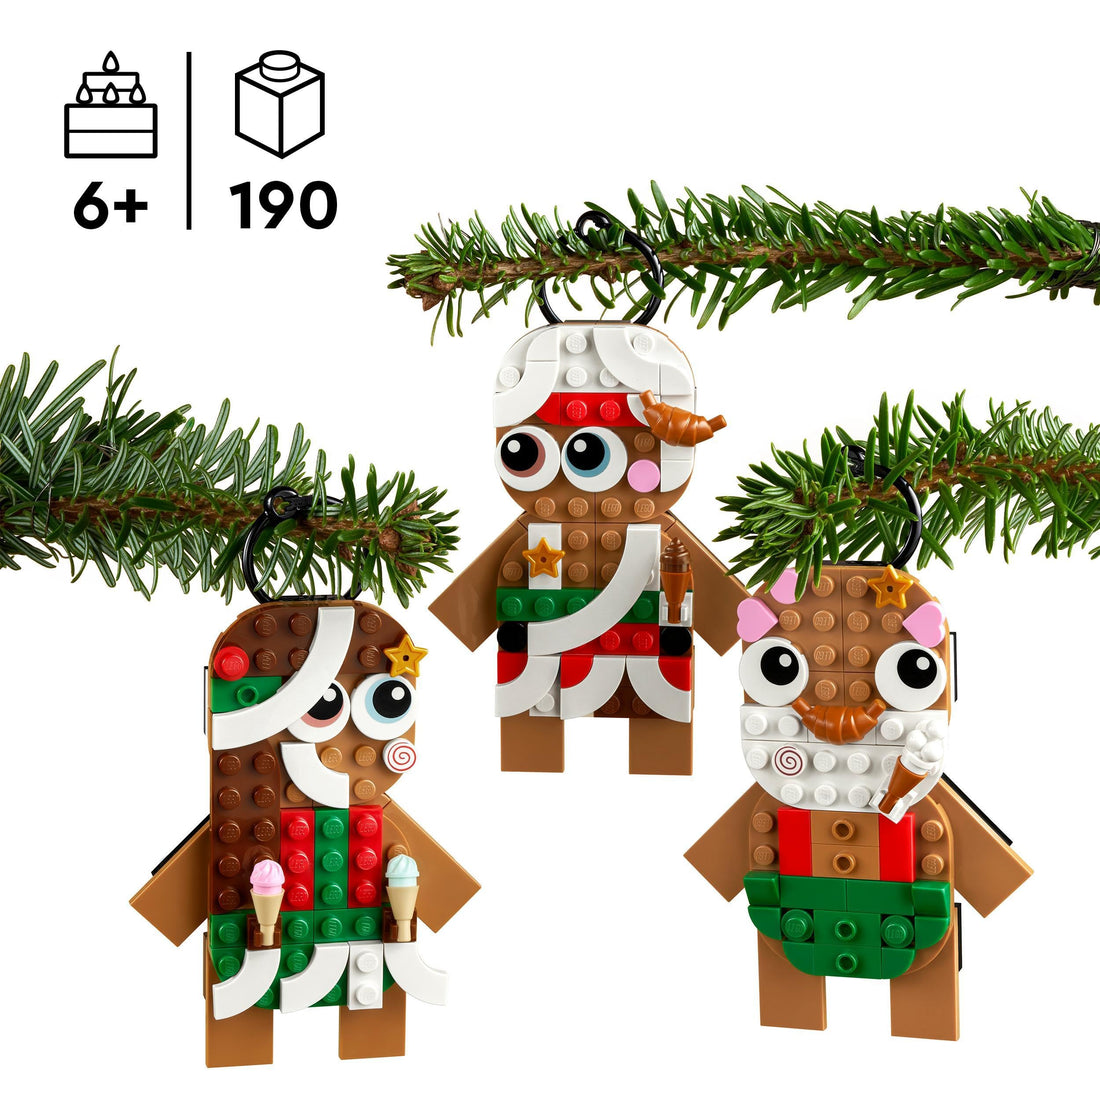 LEGO Creator Gingerbread Ornaments Set, Toys for 6 Plus Year Old Girls &amp; Boys, Easter Treat, Gift Idea, Hanging Decorations, Makes a Great Kids Bedroom Accessory 40642